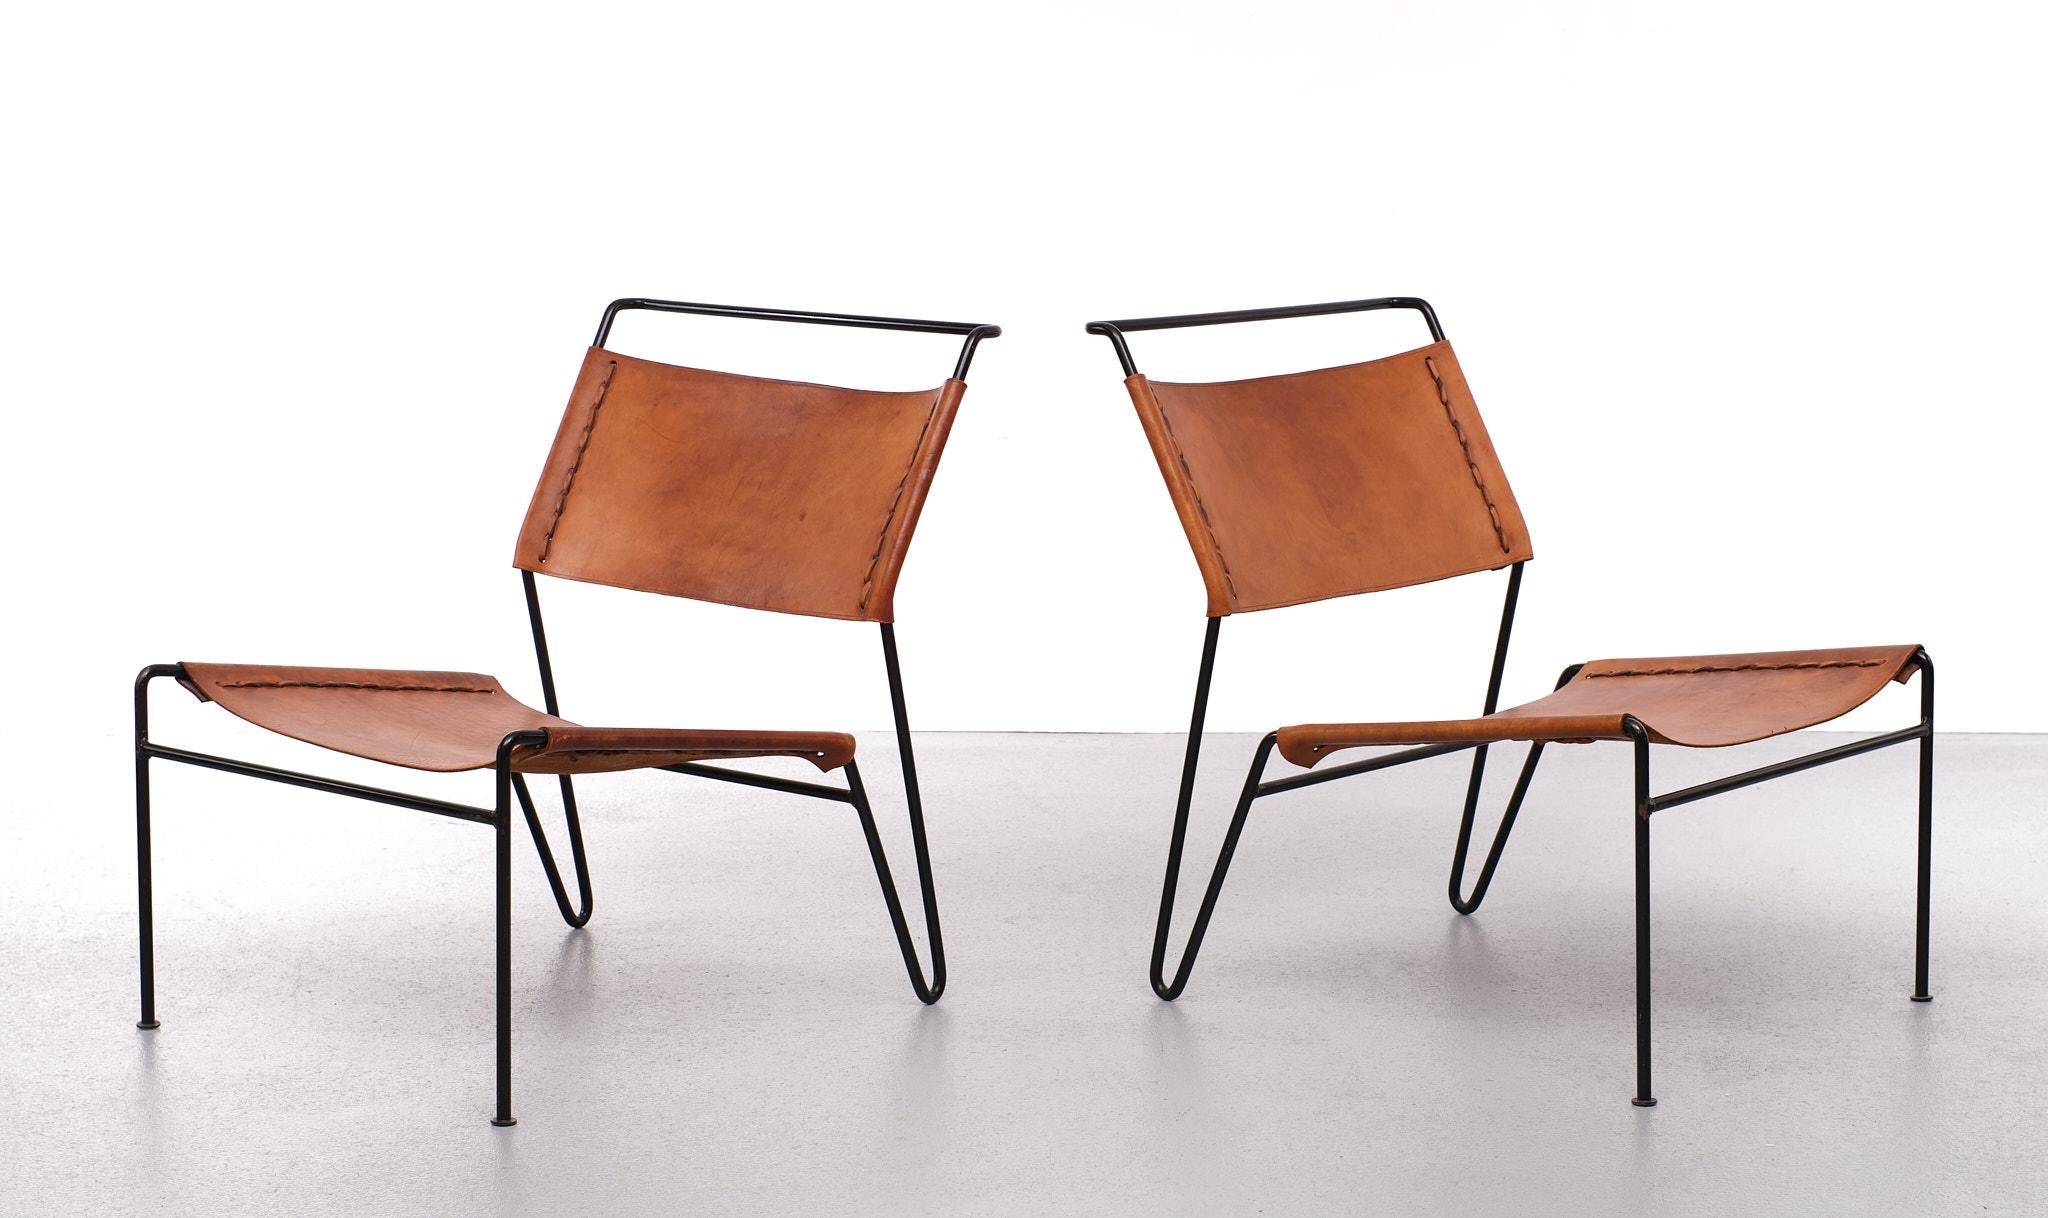 Mid-20th Century Pair of A. Dolleman Chairs for Metz & Co, Netherlands, 1950 For Sale